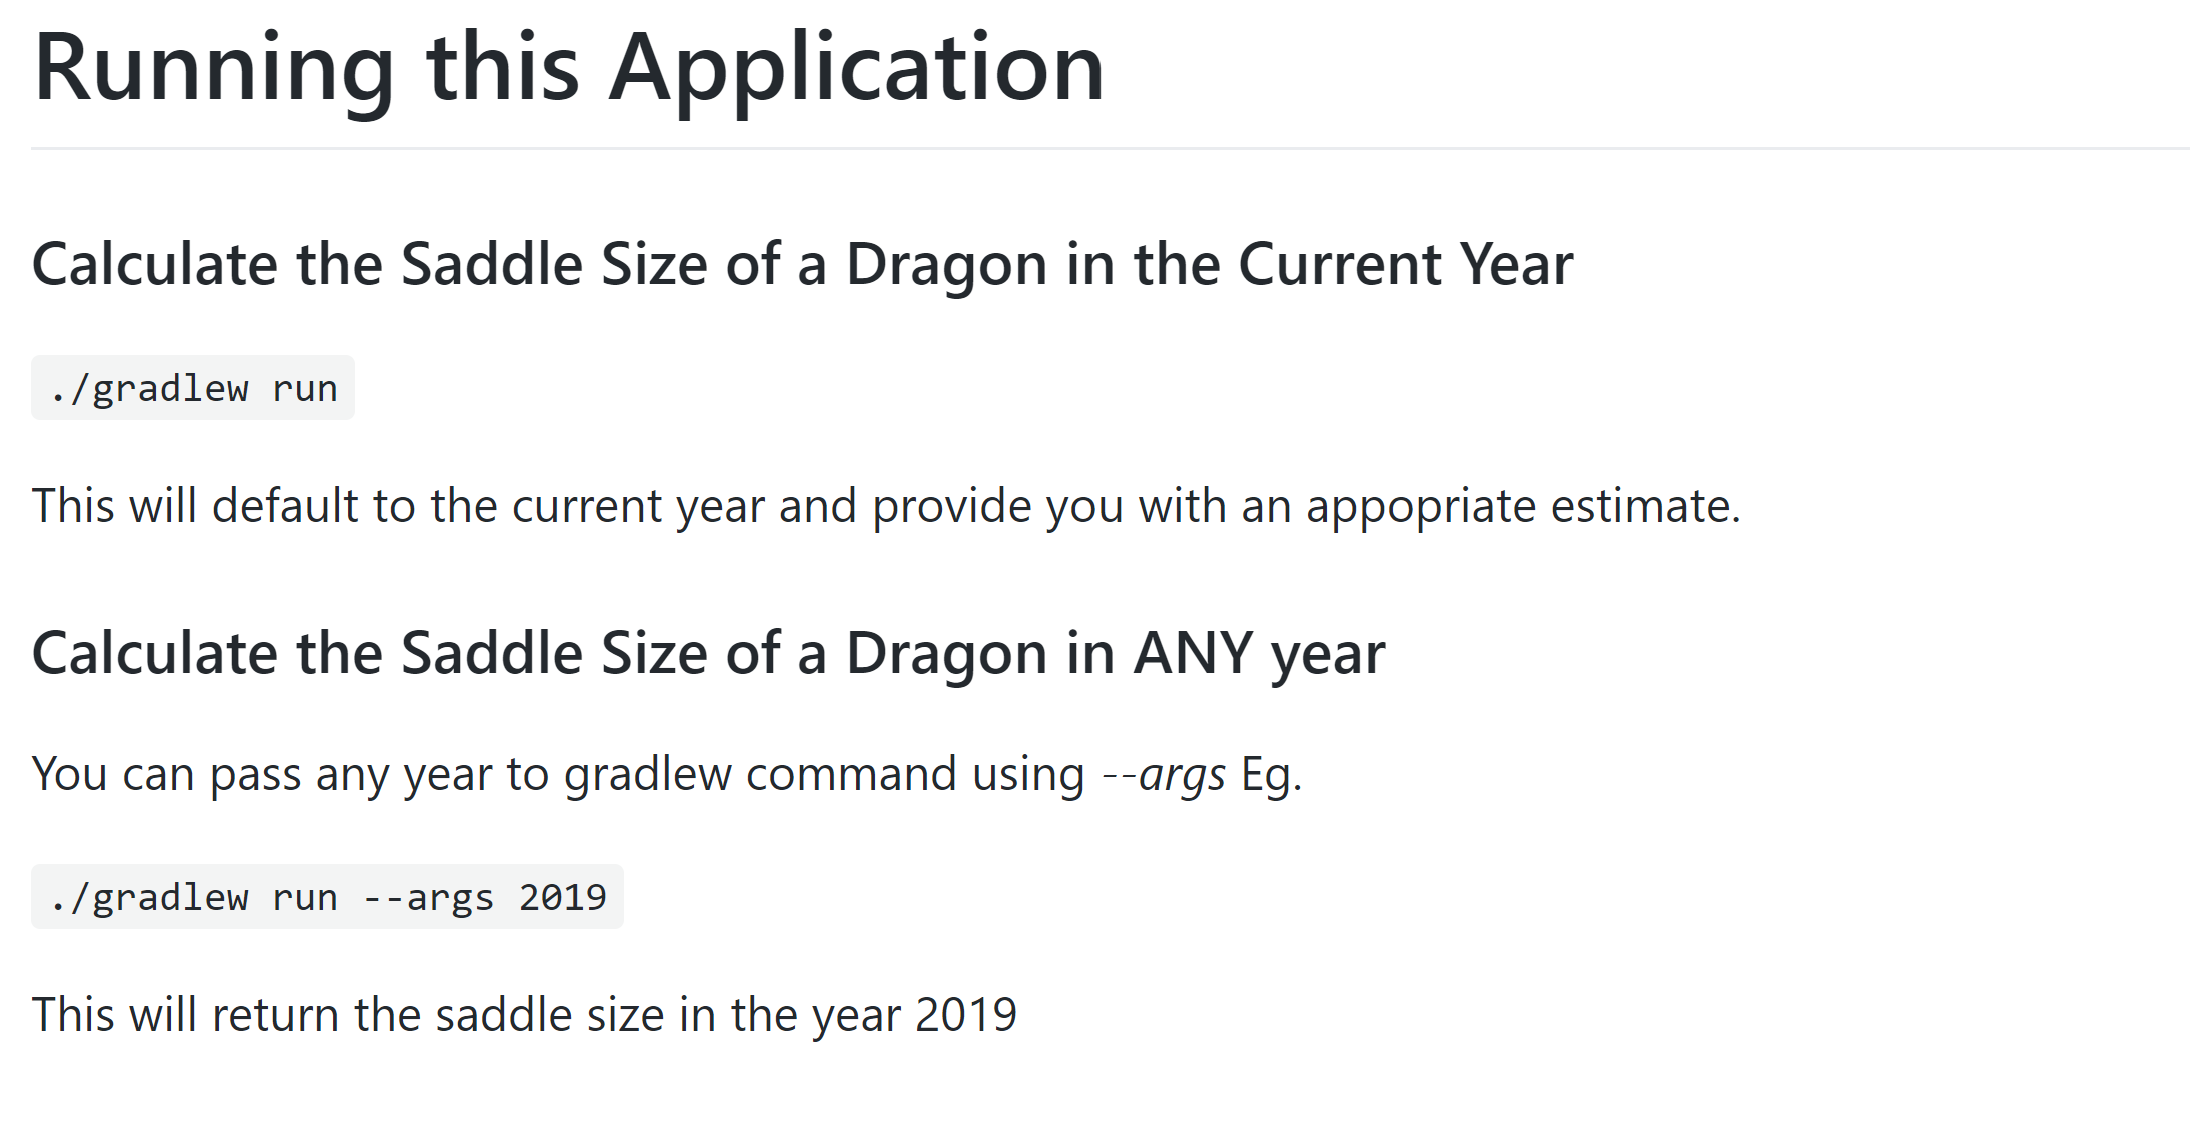 Instructions from the README telling us that we can use ./gradlew run --args 2019 to run the app for the year 2019.